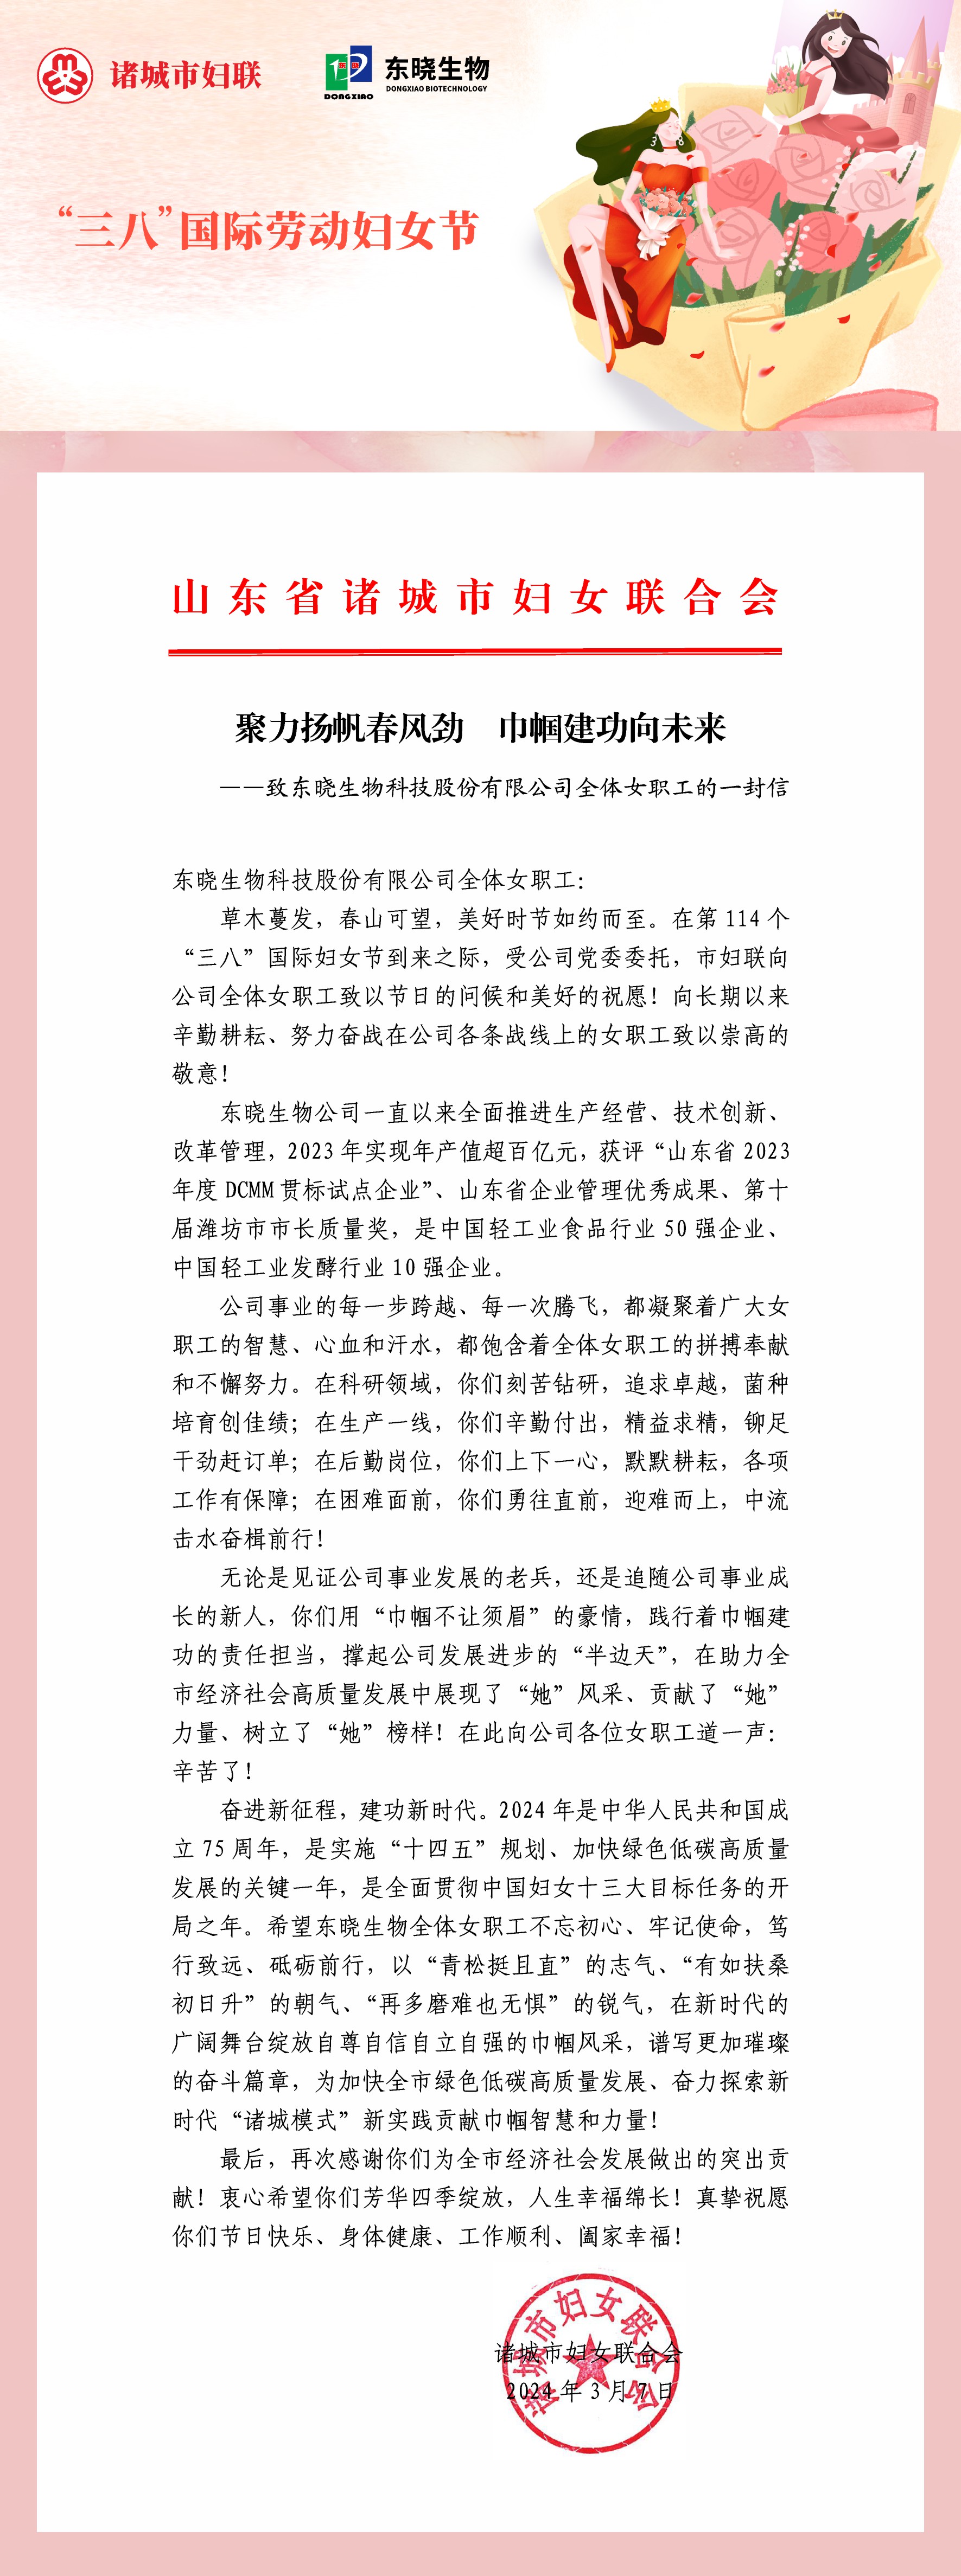 Dongxiao Biology received the Women's Federation "letter"